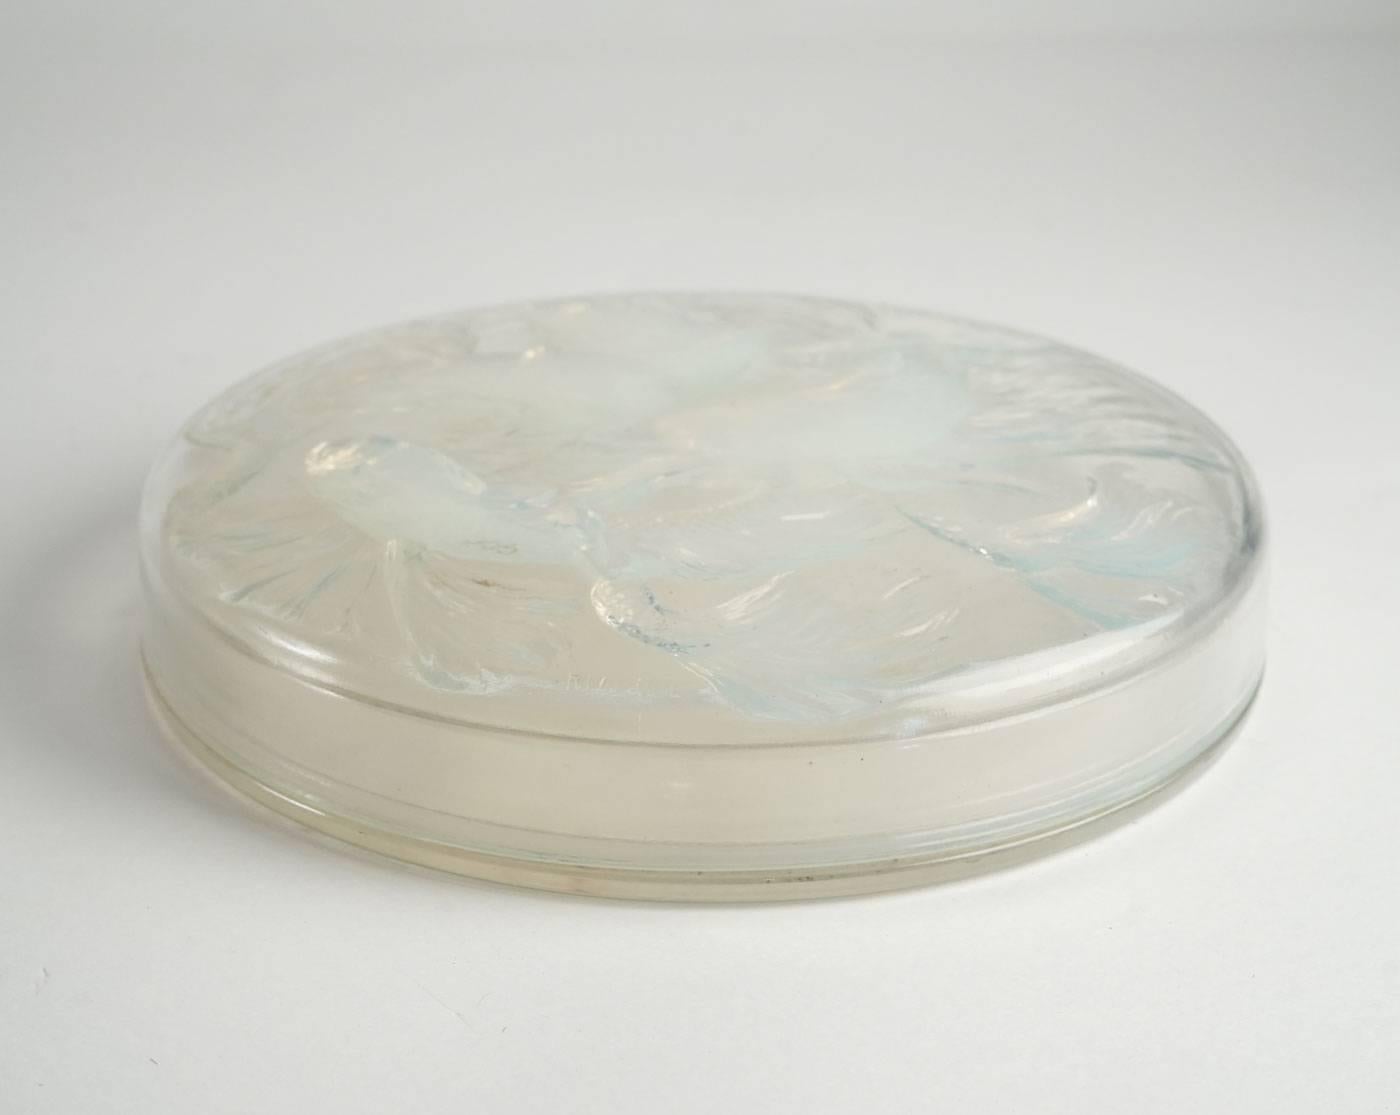 Molded opalescent pressed glass: round opalescent glass fish decorated lid over an undecorated bottom Model: 42, circa 1921.
Two parts glass having a fish motif cover.
Bibliographie:
Félix Marcilhac, “René Lalique, 1860-1945, maître verrier”, les